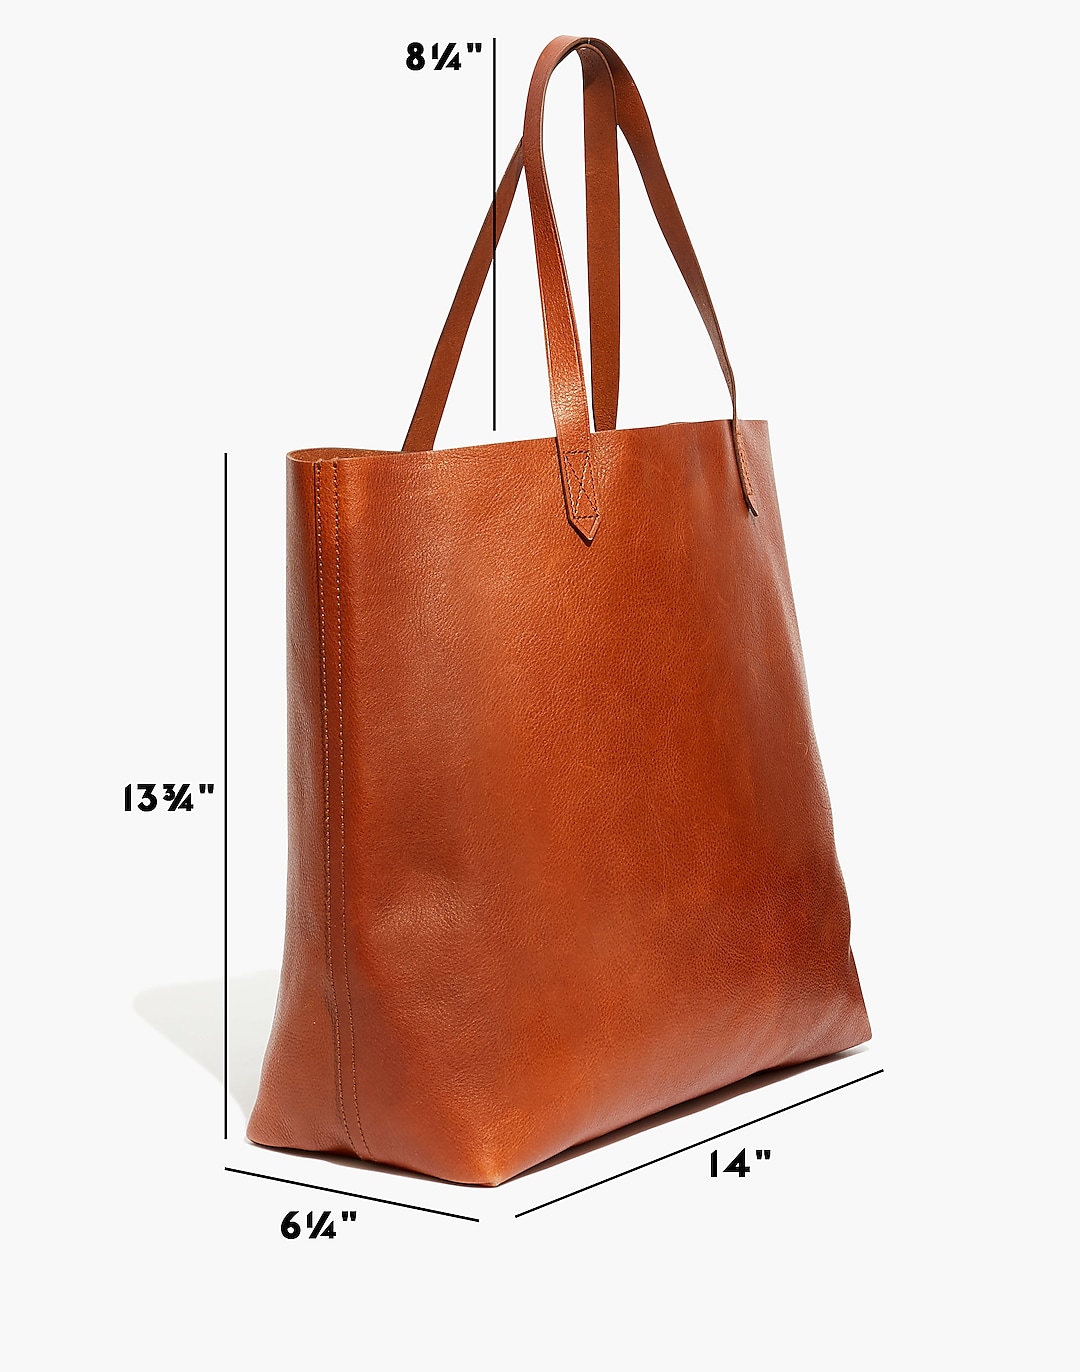 Madewell Foldover Transport Tote Sale 2021